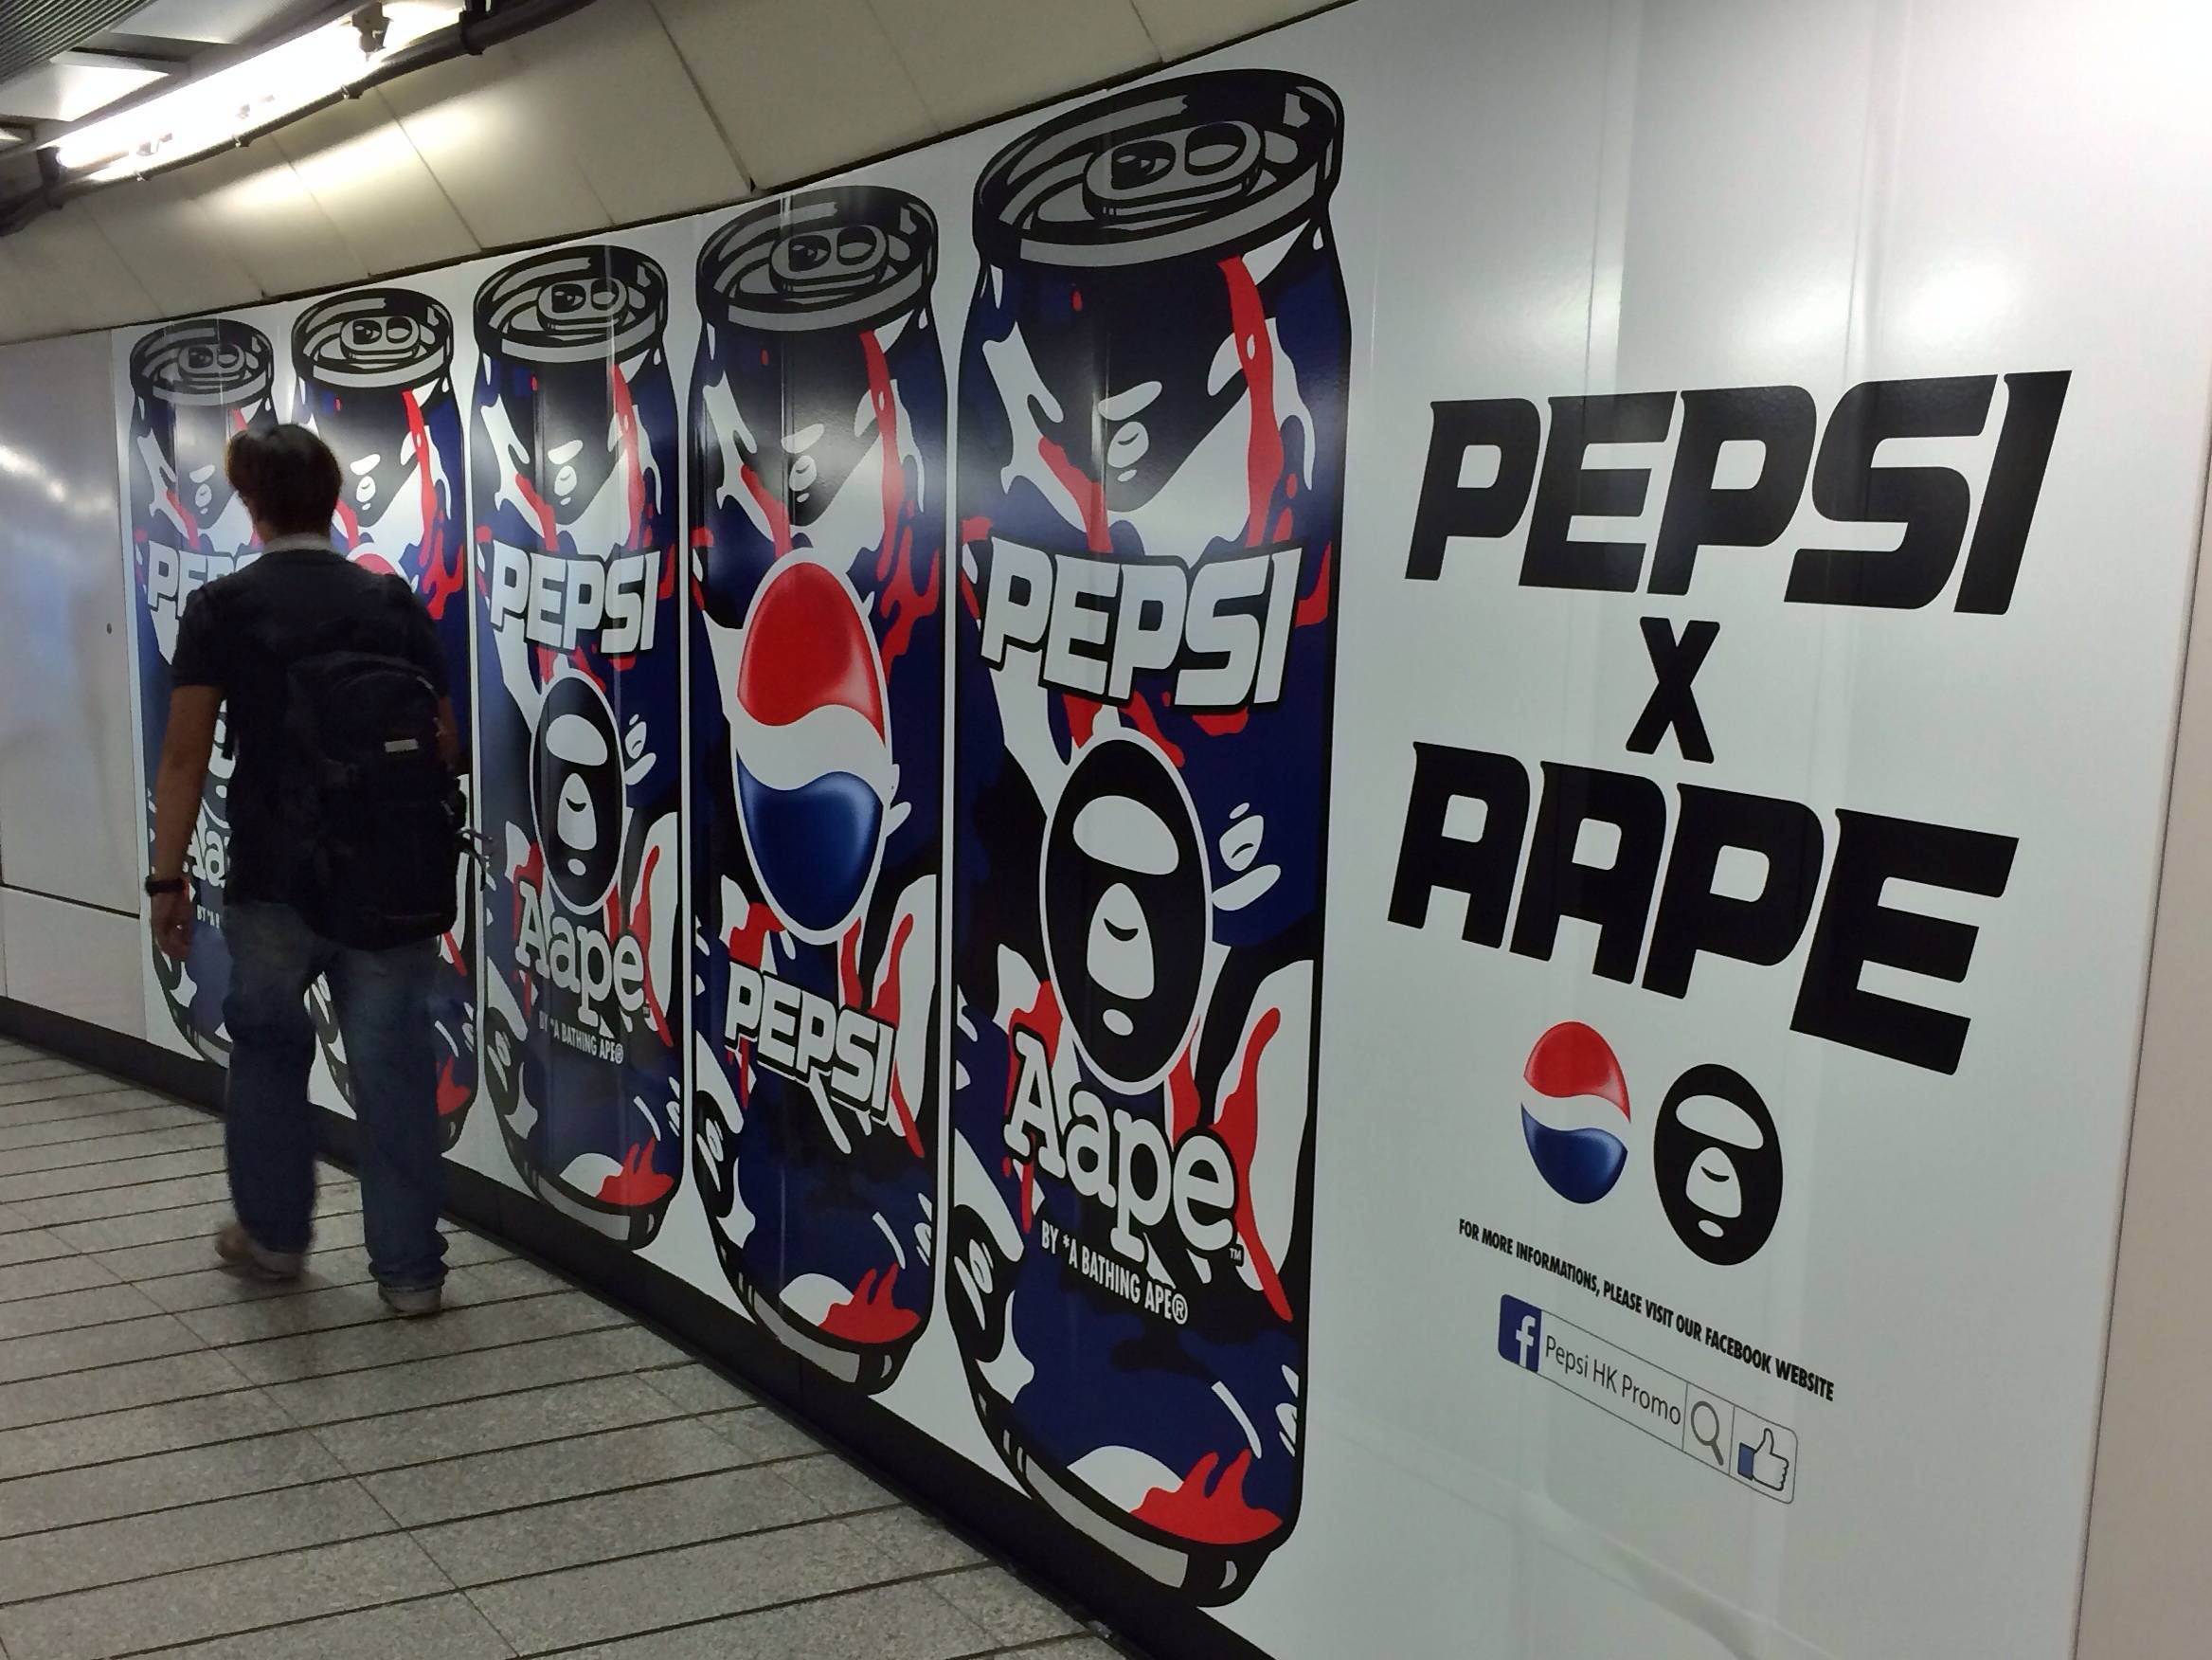 pepsi rape - Img For More Informations, Please Visit Our Facebook Website By A Bathing Appo f Pepsitk Promo a B